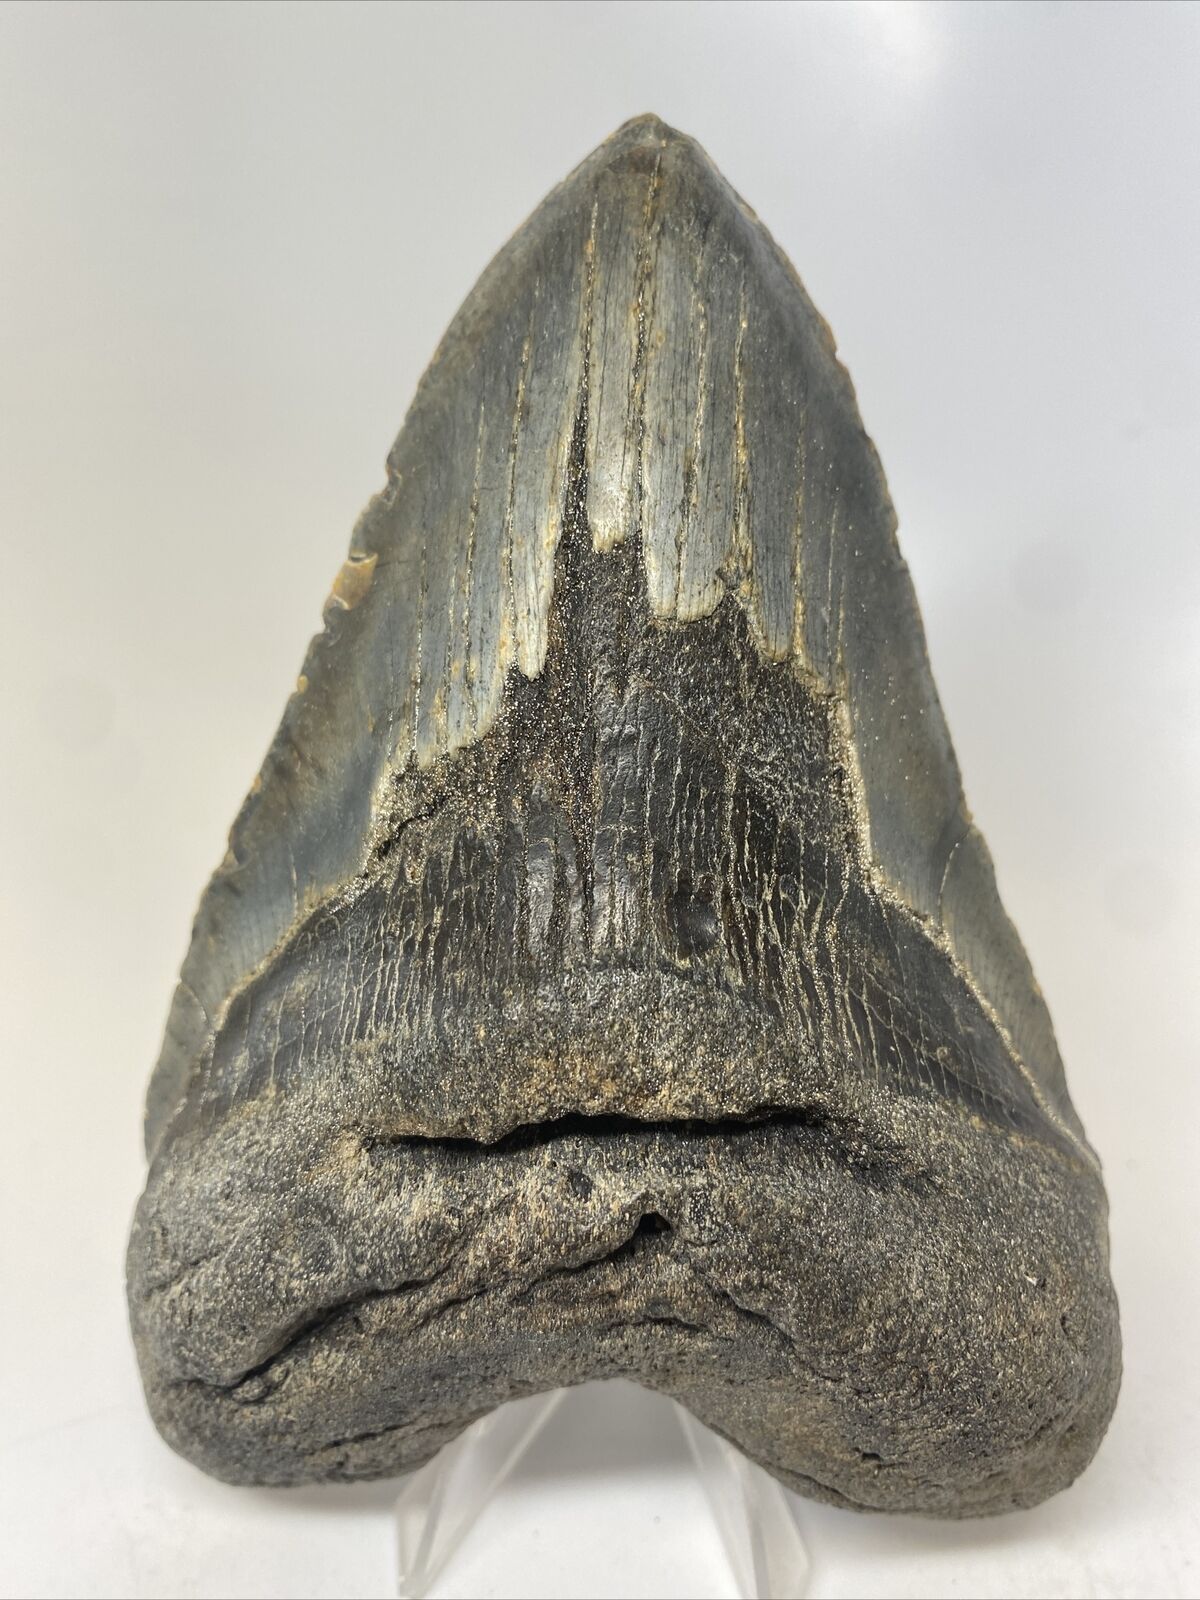 Megalodon Shark Tooth 5.75” Huge - Thick - Lower Jaw Fossil 14632